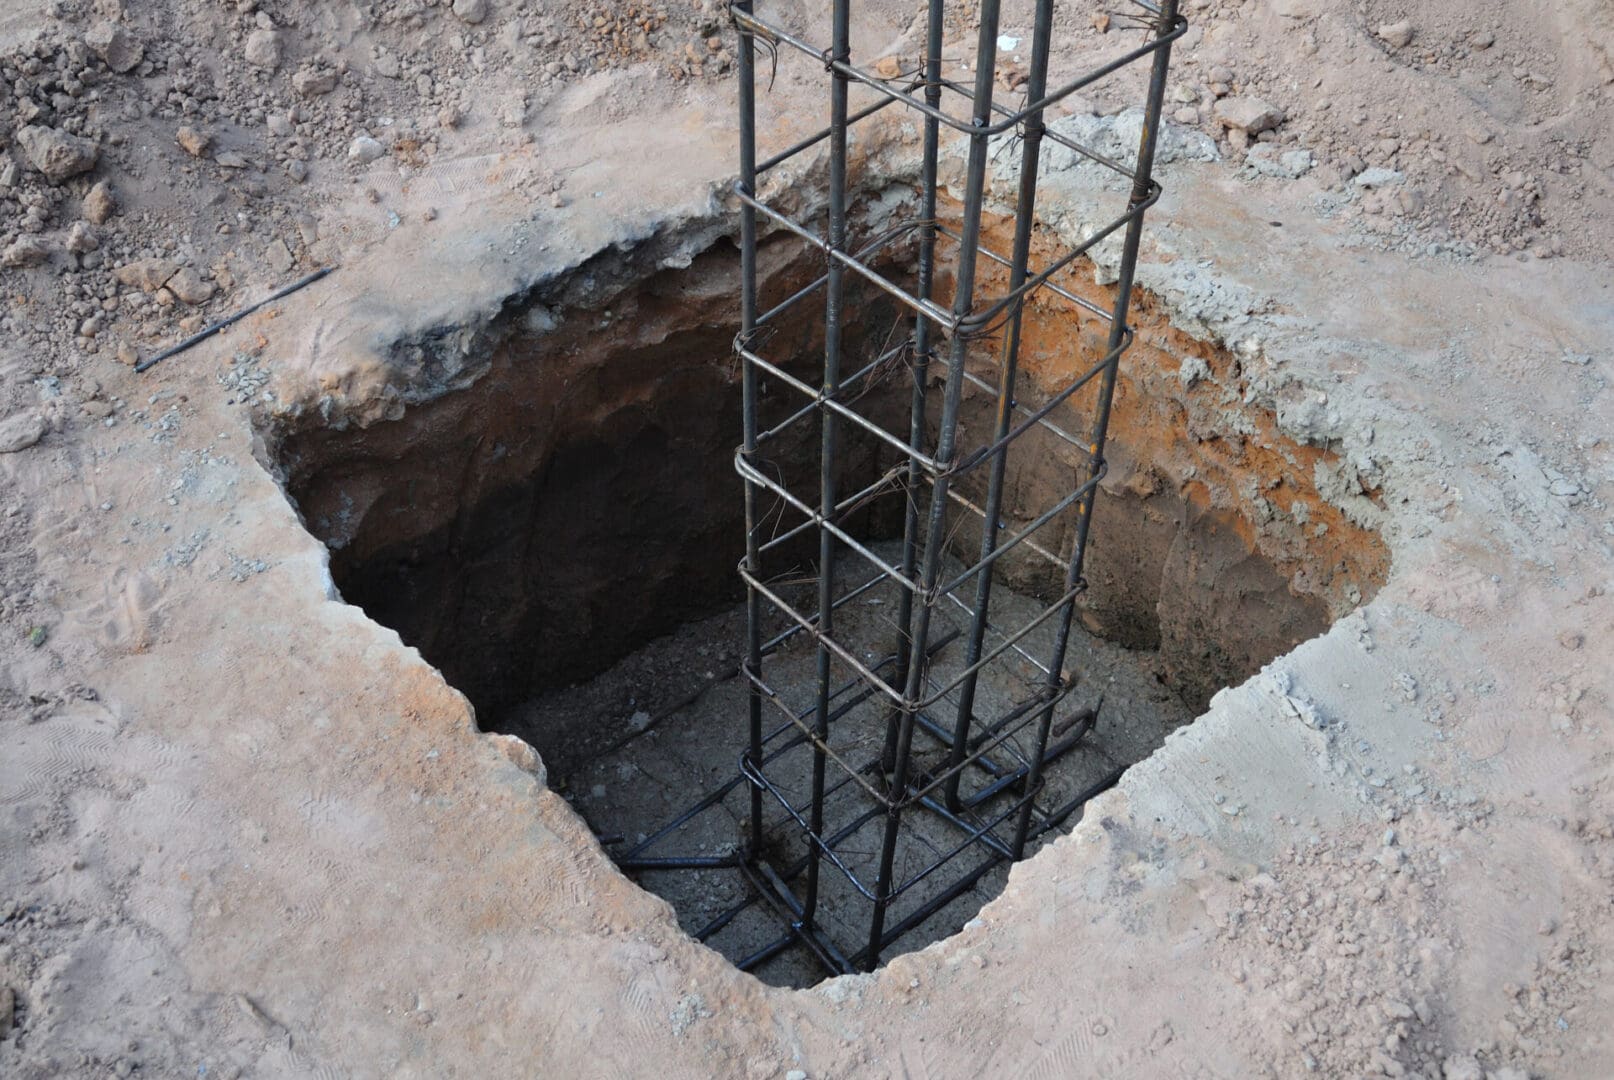 A hole in the ground with metal bars around it.